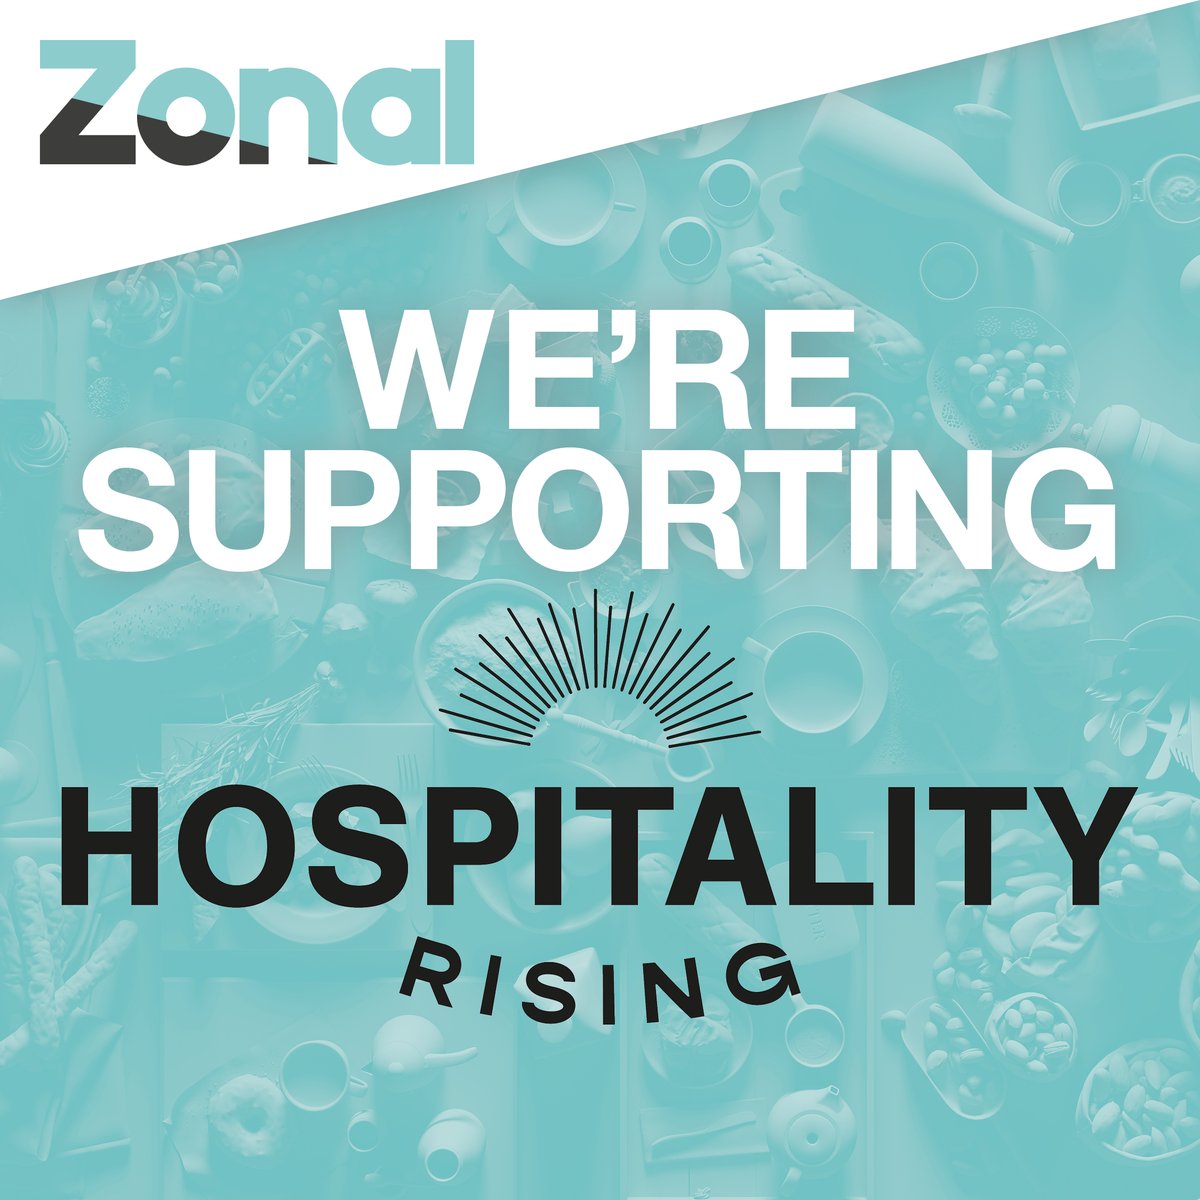 👍 We are so pleased to announce that we've become the latest partner to back the major #HospitalityRecruitment campaign, @HospoRisingUK. ➡️ Are you in? To find out more & help raise funds: hospitalityrising.org #ZonalUK #HospitalityRising #WeAreHospitality #UKHospitality